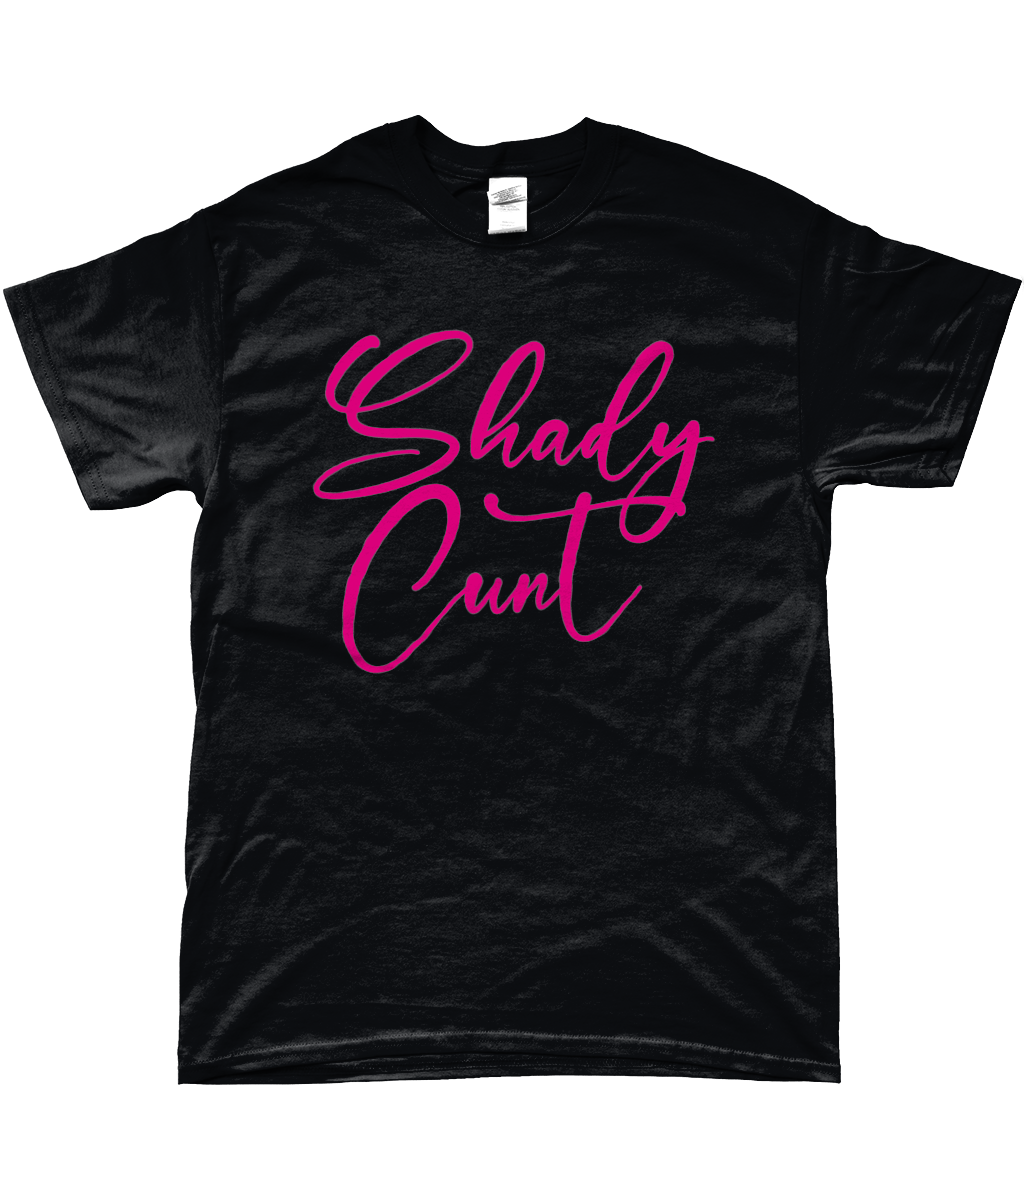 Snatched - Shady Cunt T-Shirt